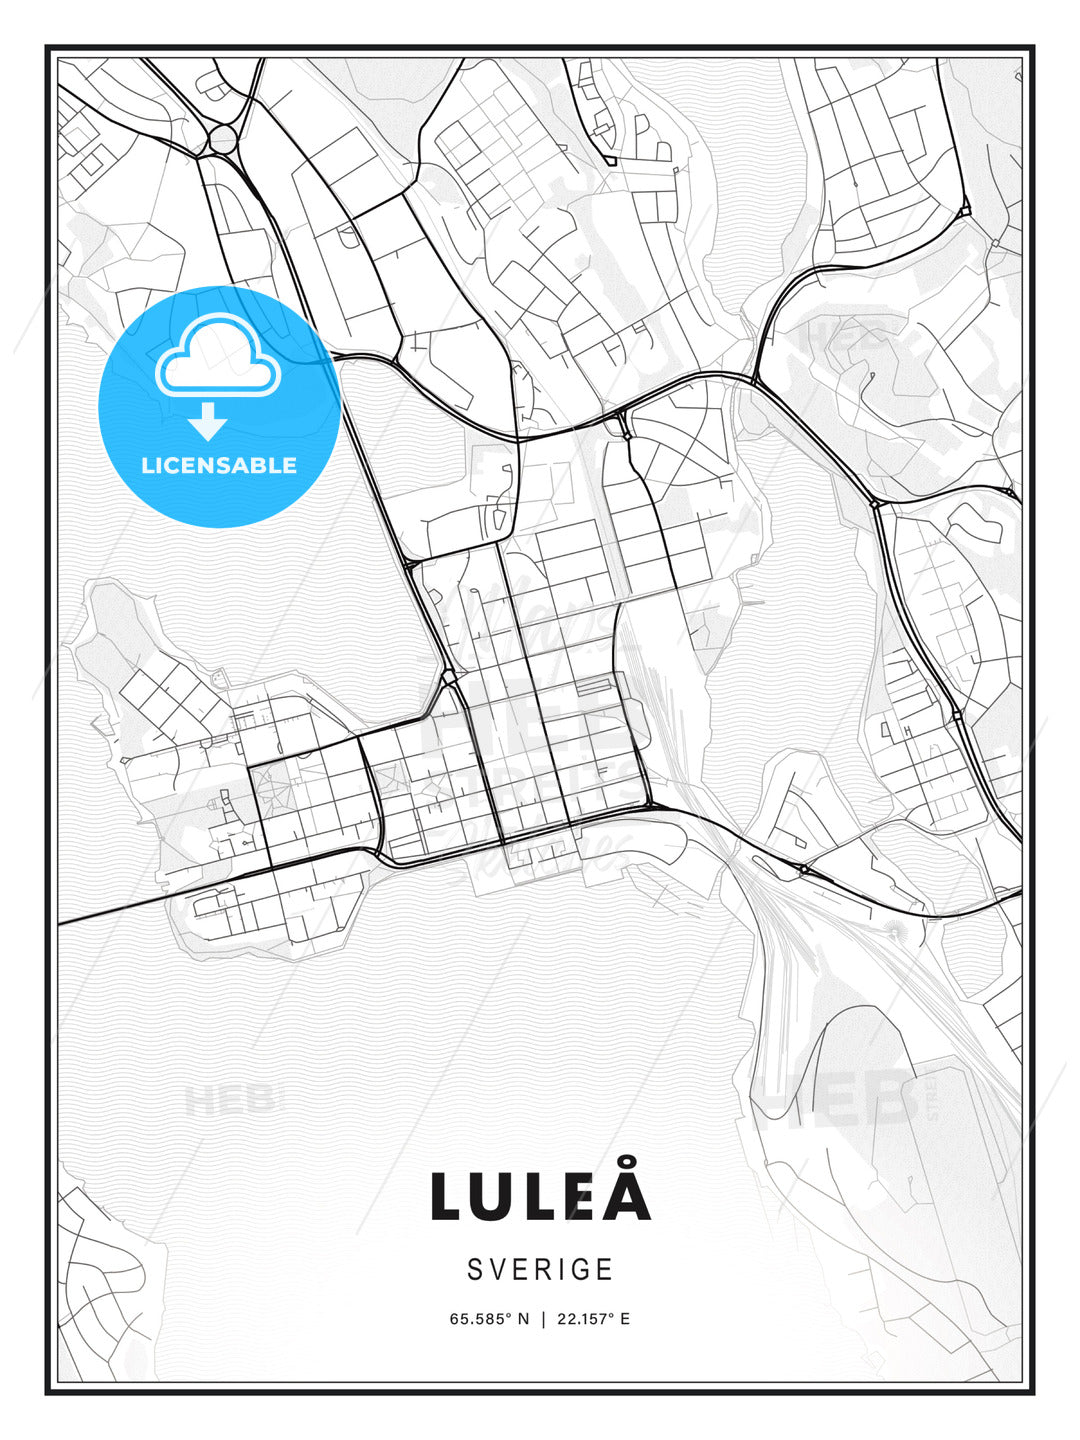 Luleå, Sweden, Modern Print Template in Various Formats - HEBSTREITS Sketches